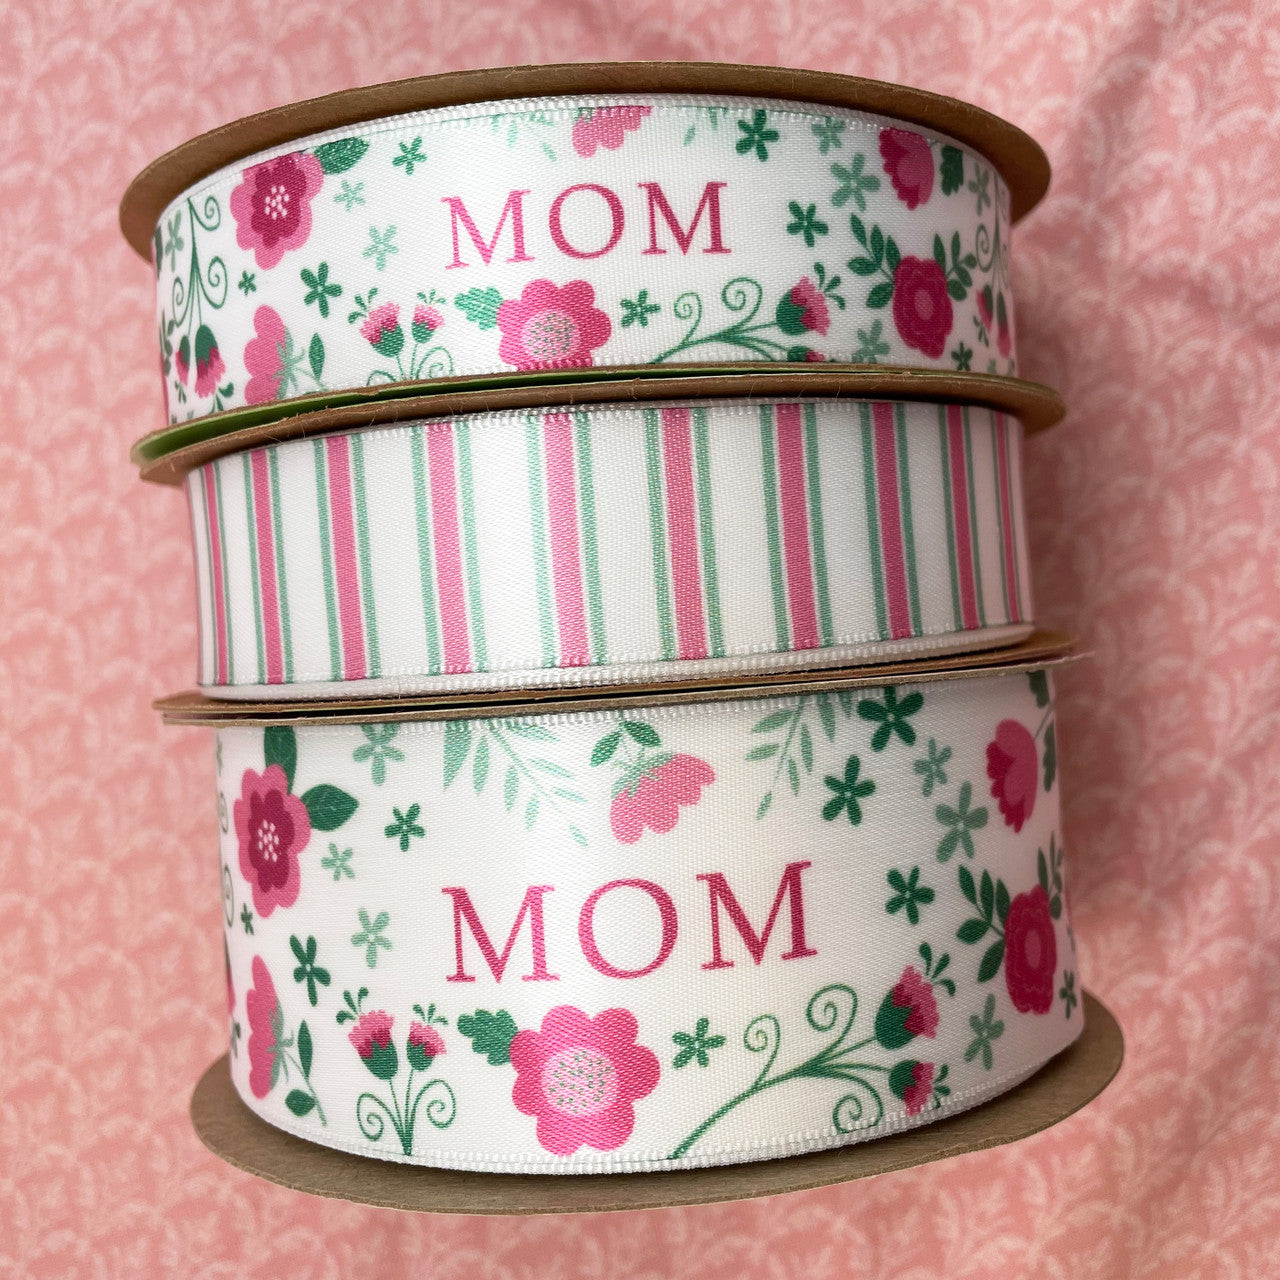 We are all about mix and match! Our beautiful pink and sage stripes are designed to mix with our Mother's Day ribbons to make a truly unique event or package!